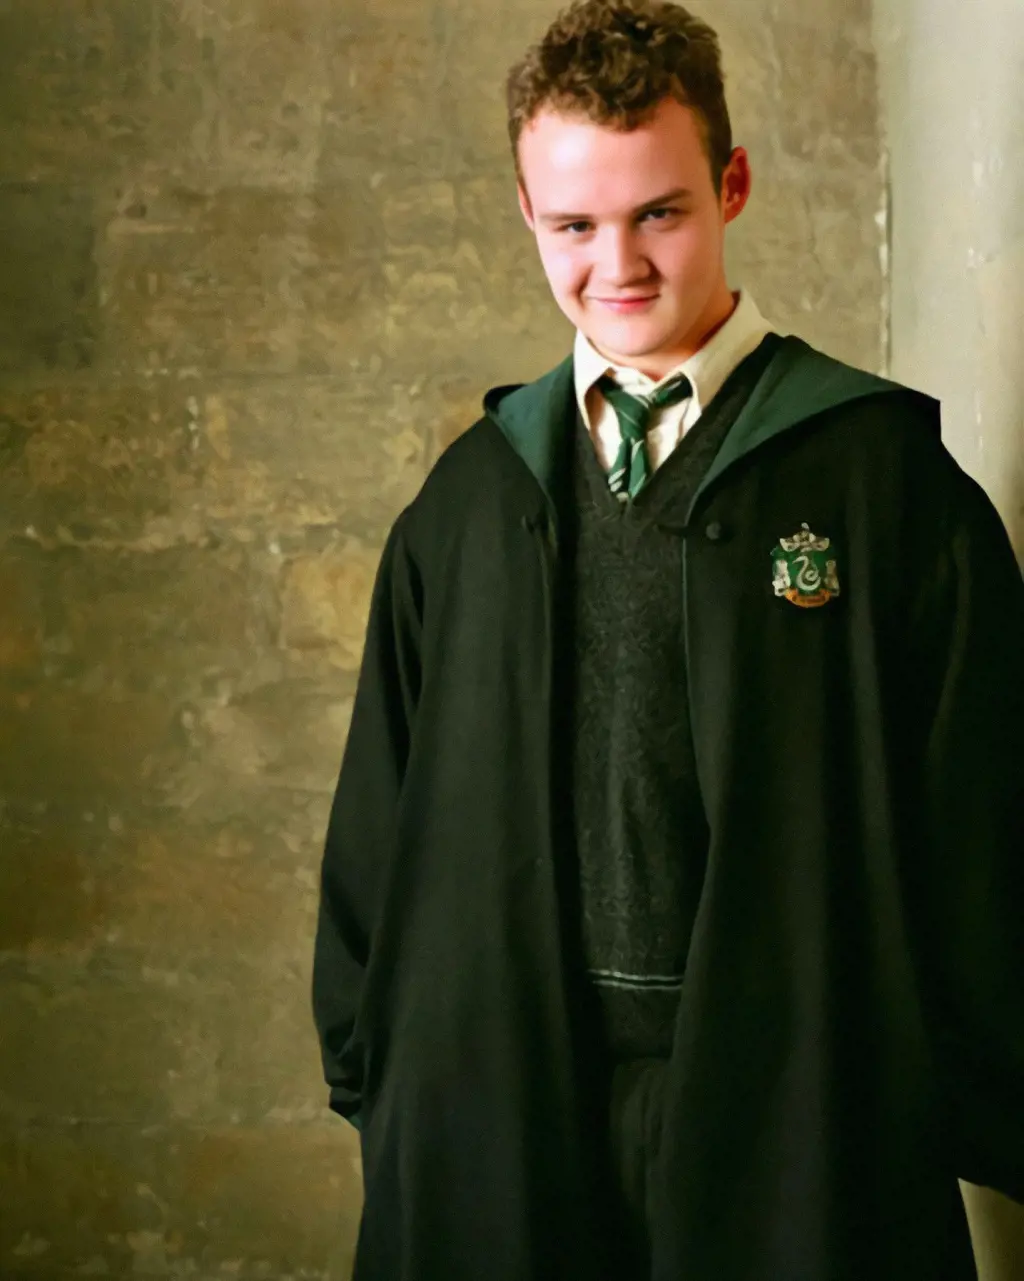 Gregory Goyle is a British Slytherin student loyal to Draco Malfoy